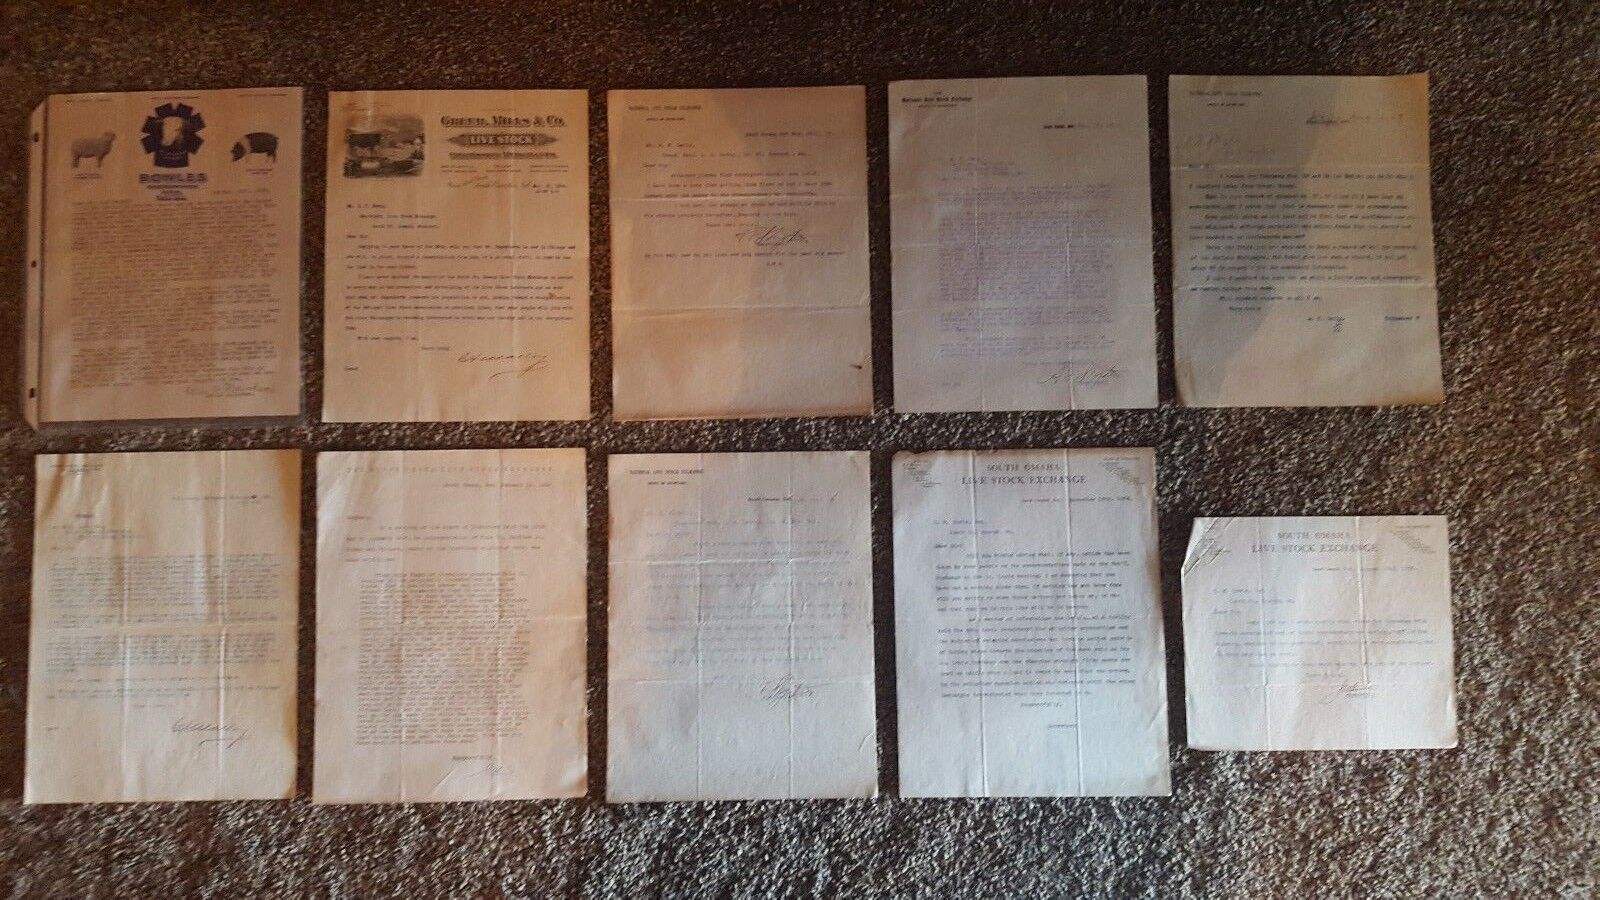  South Omaha Stockyard Livestock Commision Letters Lot Of 10